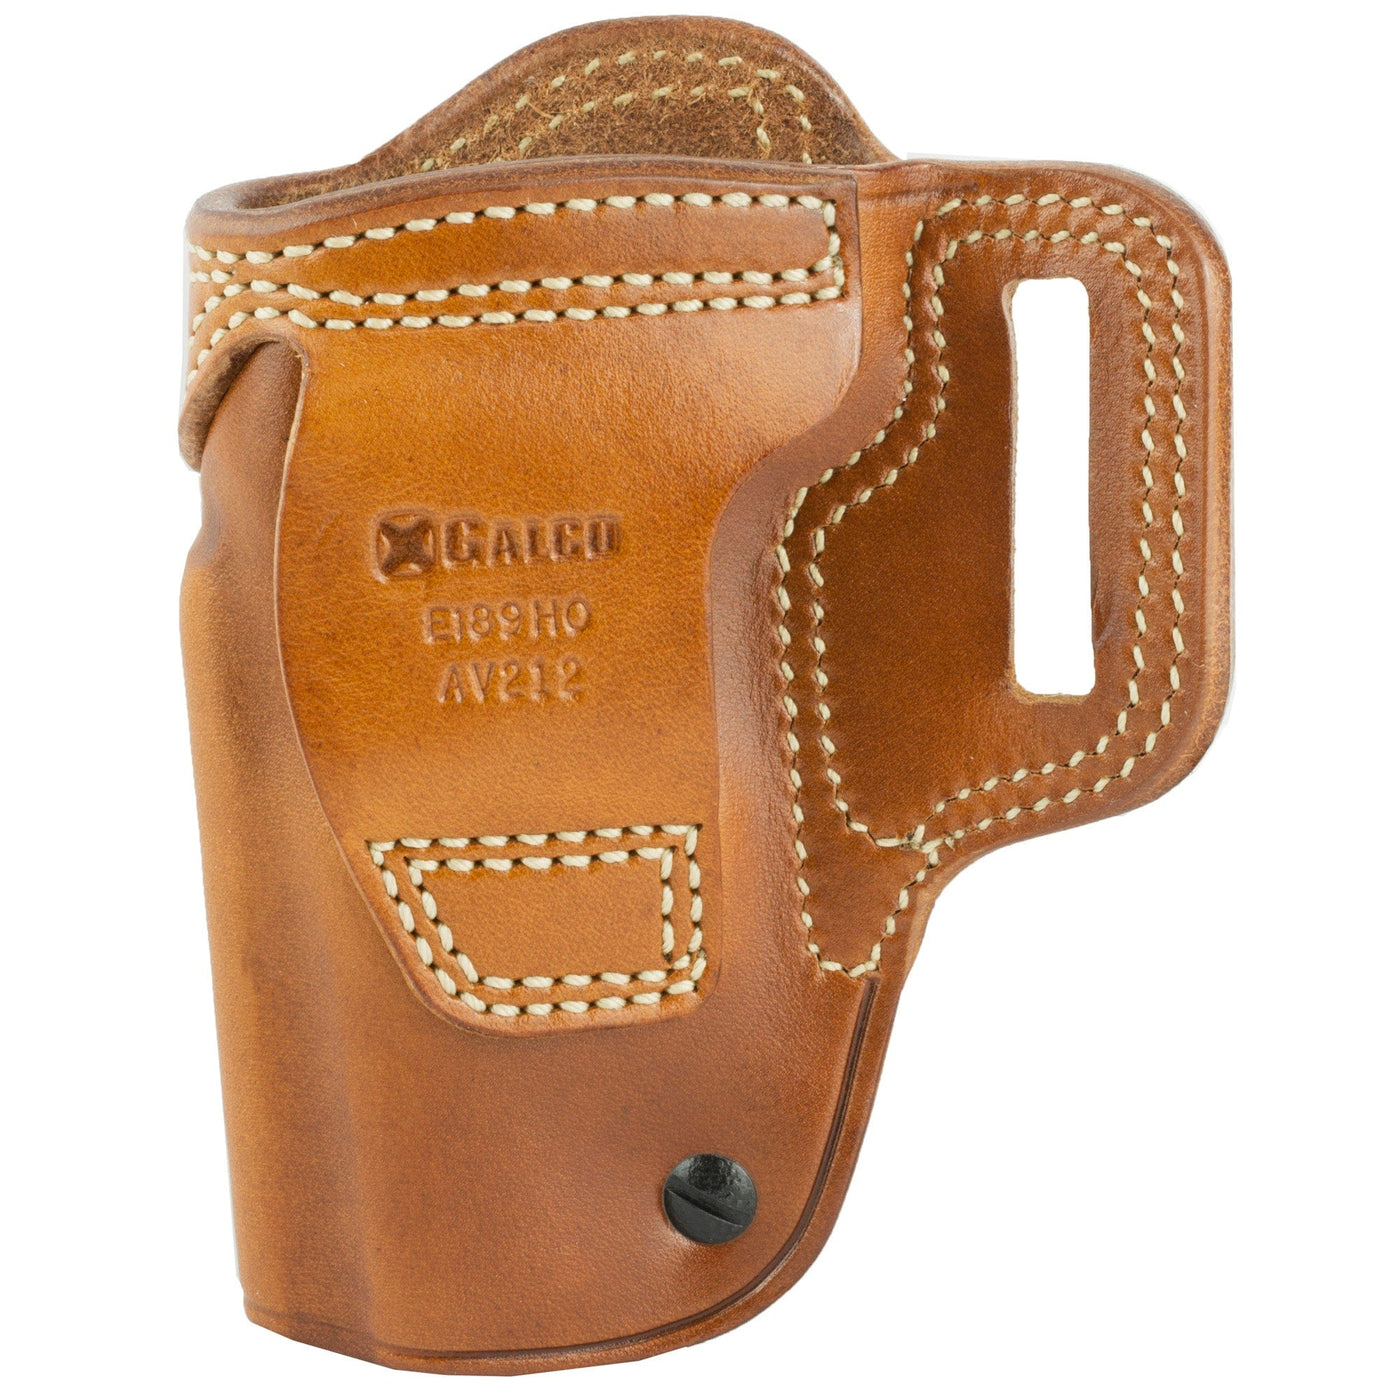 Galco Galco Avenger Belt Holster Rh - Leather 1911 5" Tan Tan Firearm Accessories